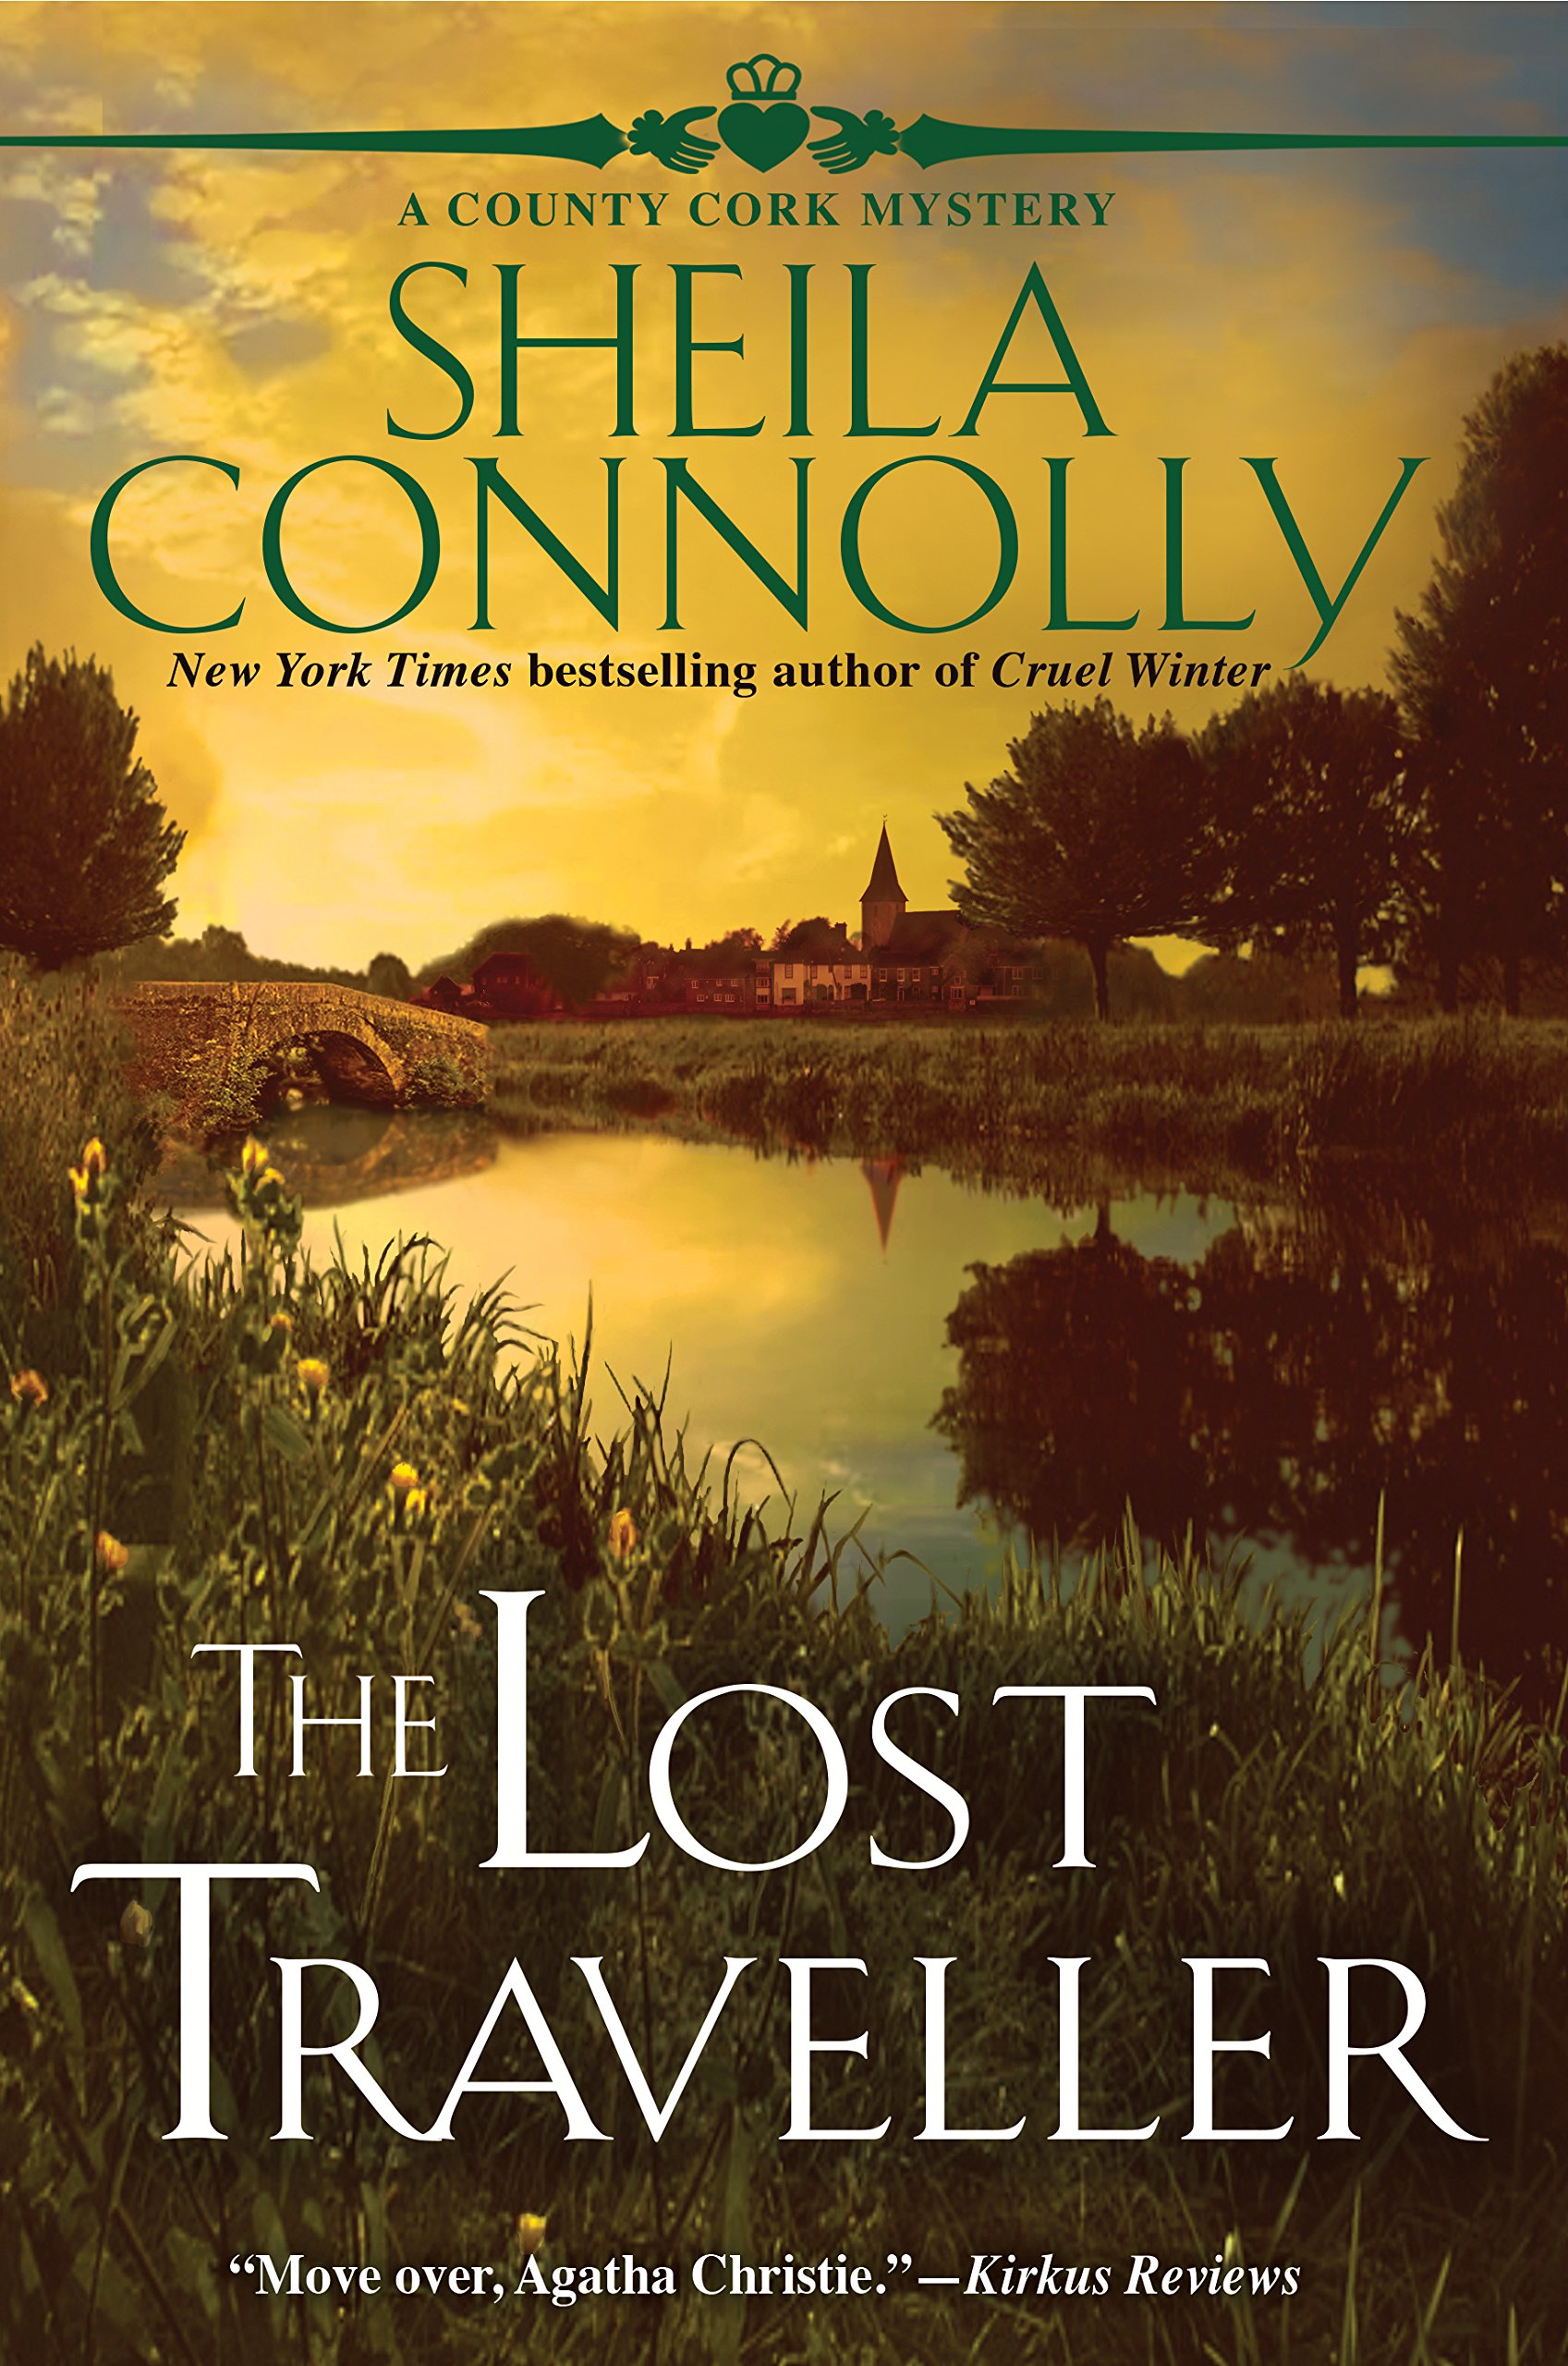 The Lost Traveller: A County Cork Mystery